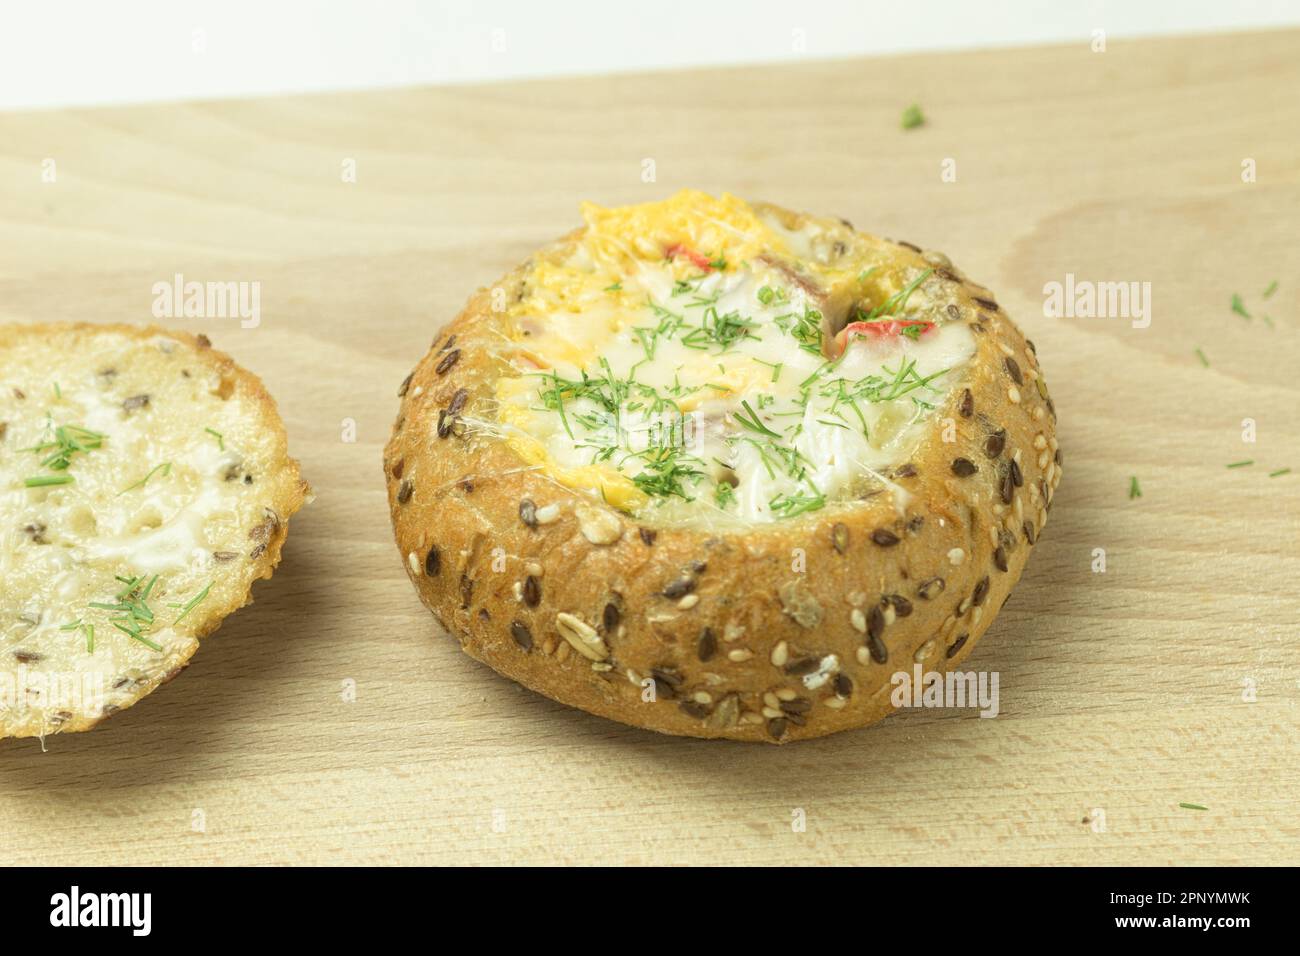 Delicious Bun stuffed with cheese and egg. Quick sandwich recipe. Quick ...